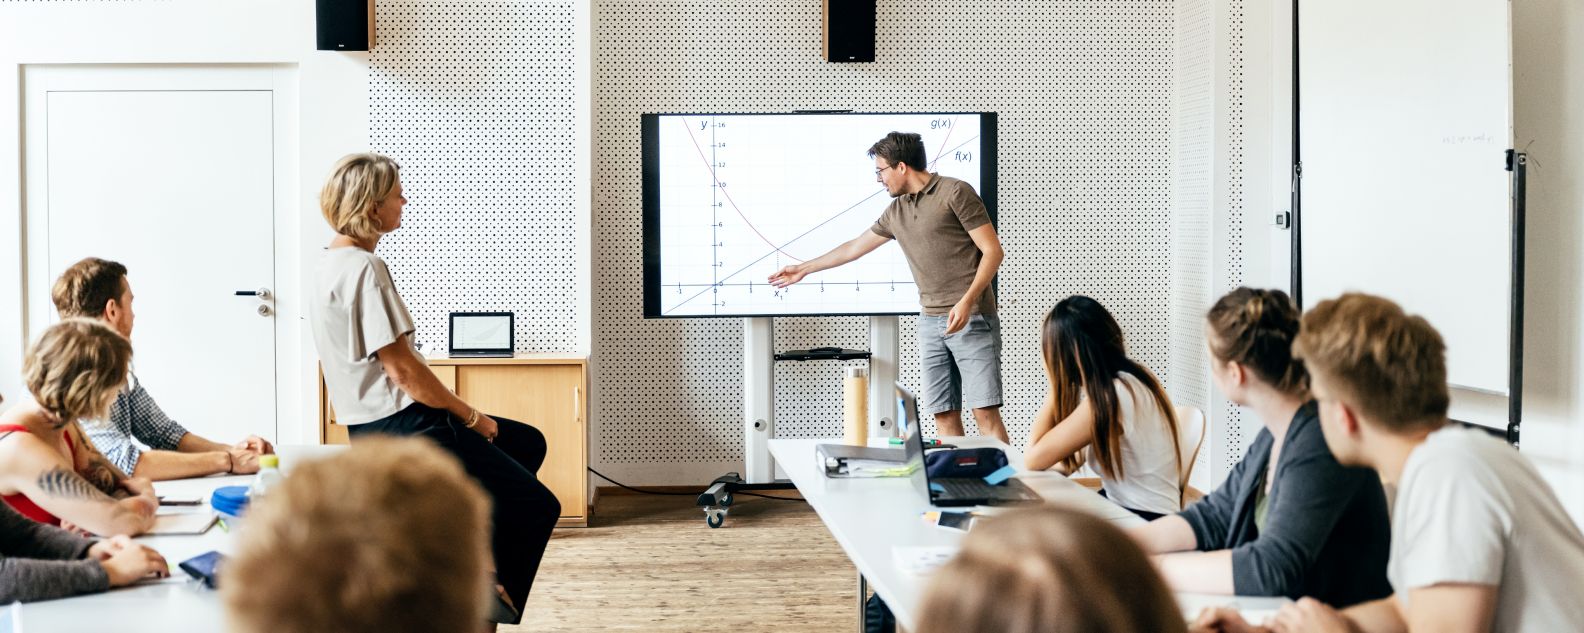 A student giving a presentation to the class during a seminar session and using a large monitor as a visual aid